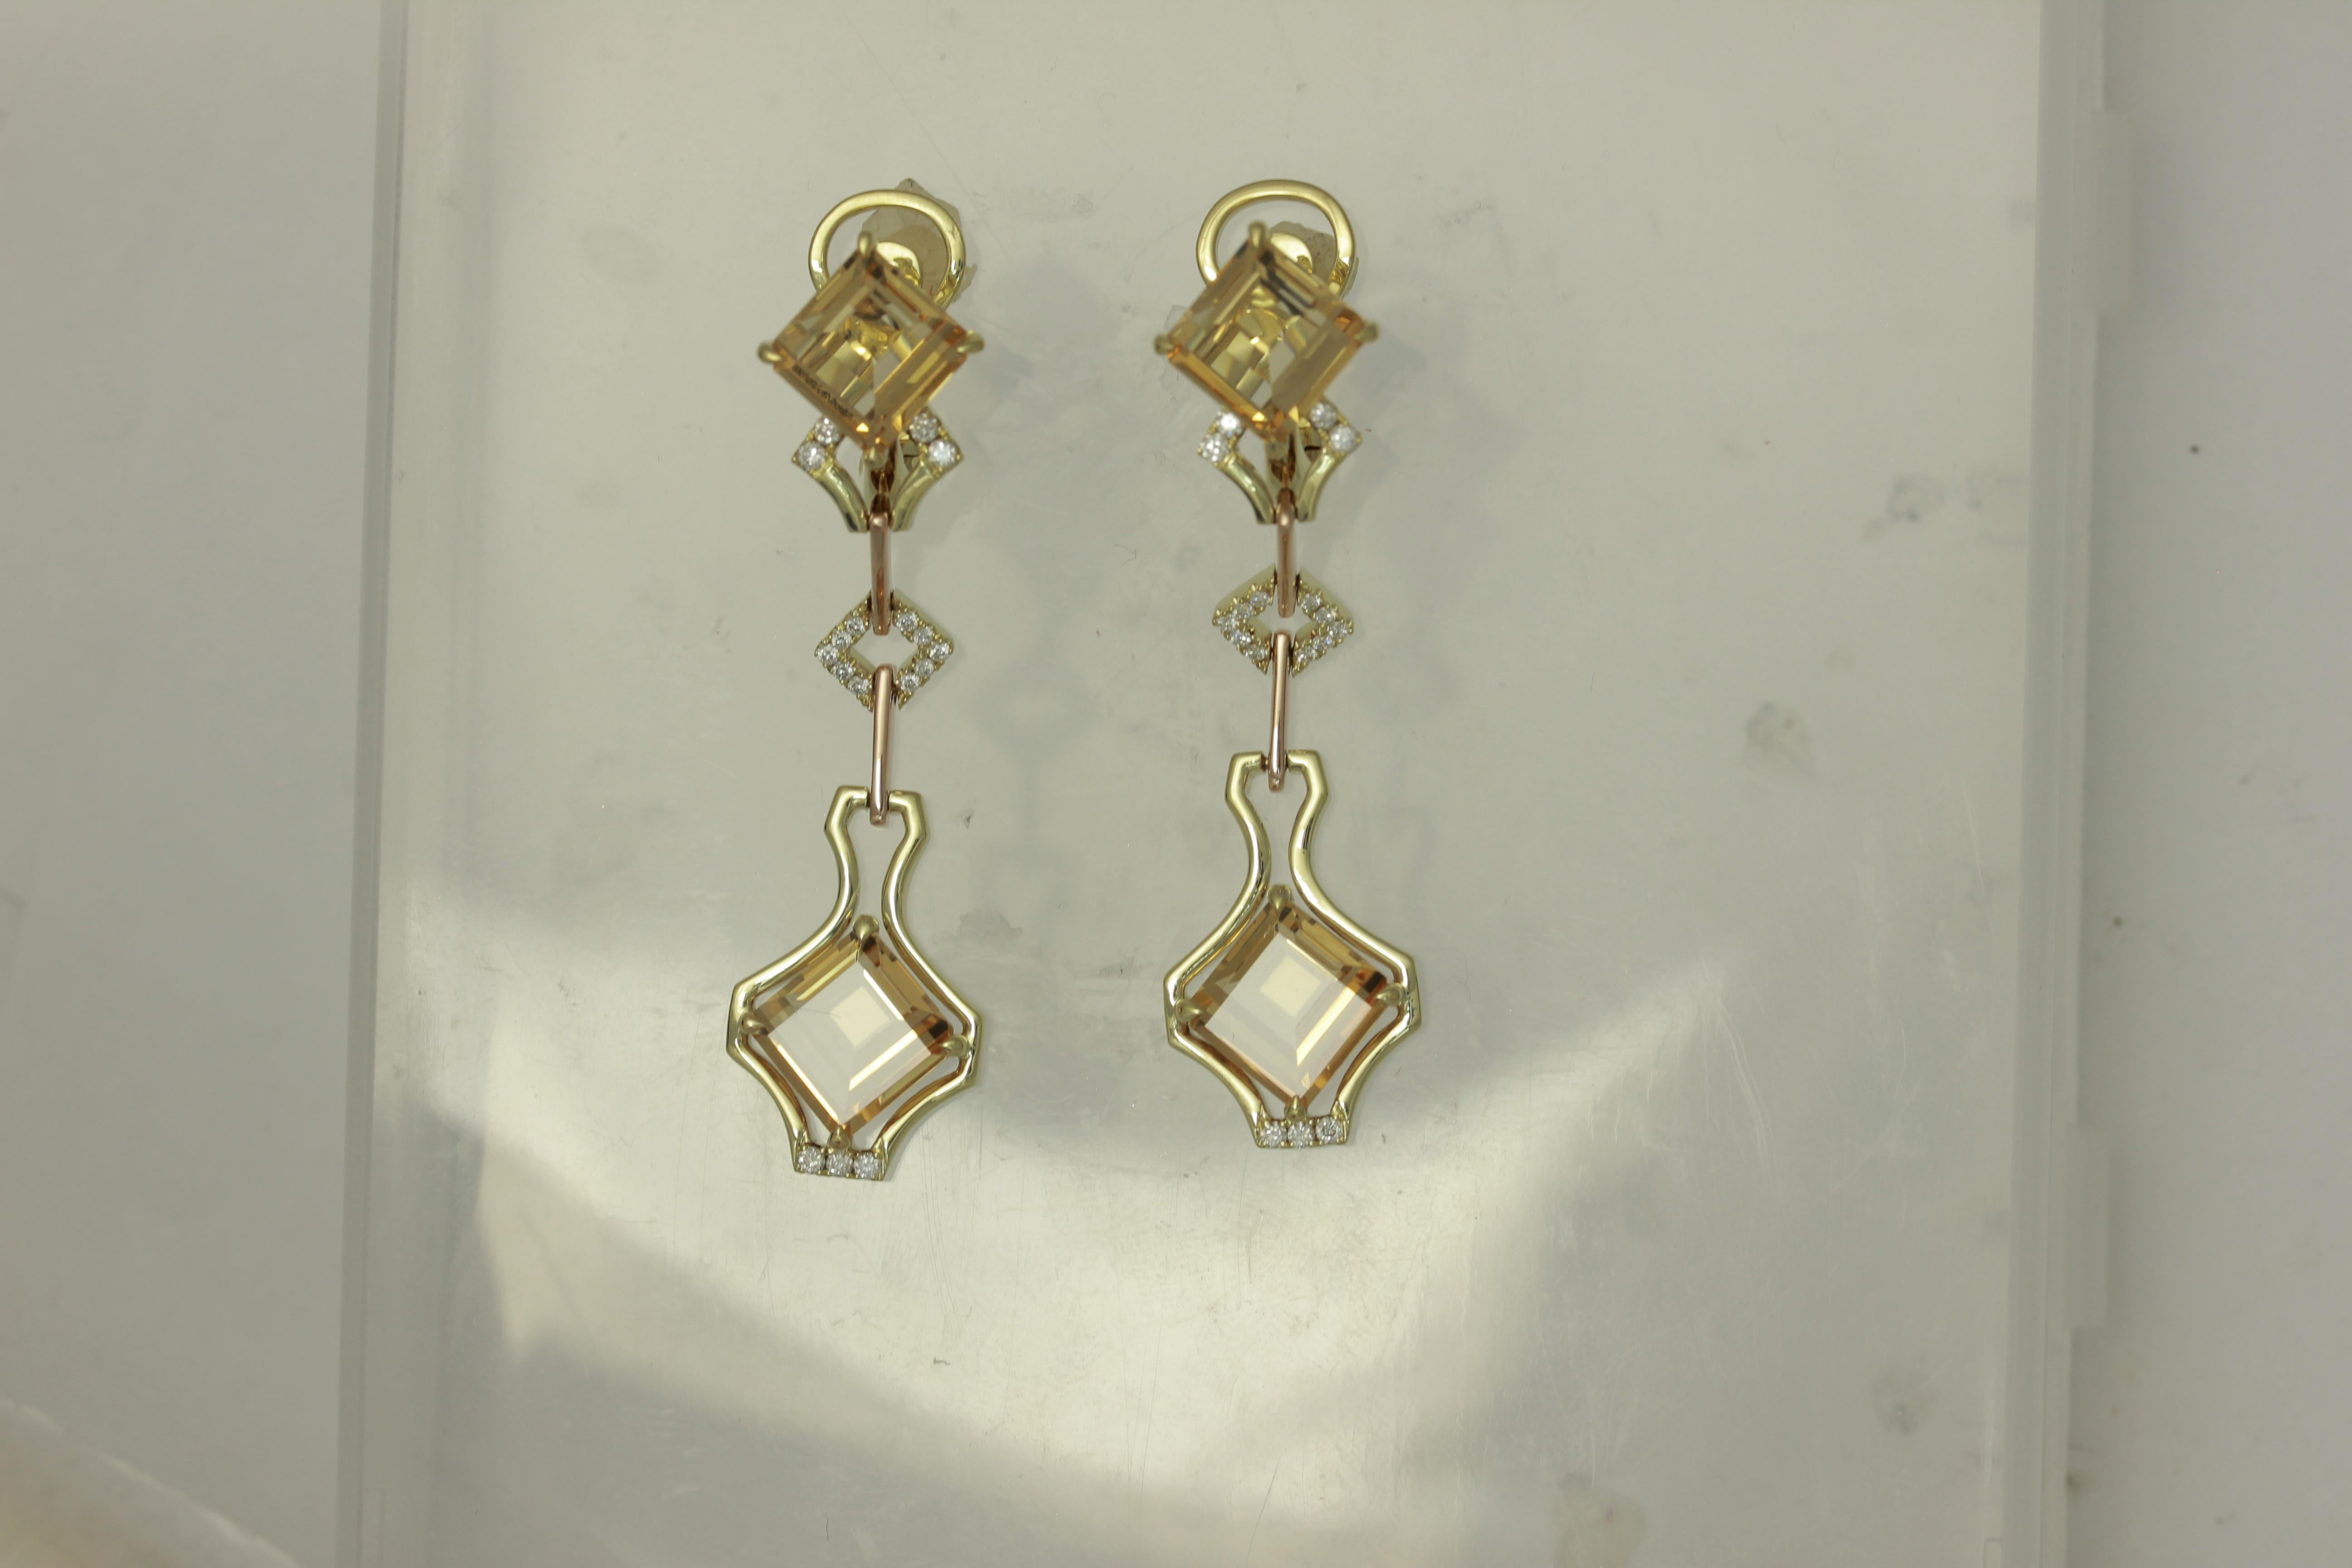 Contemporary Frederic Sage One of Kind 8.99 Carat Imperial Topaz and Diamond Earrings